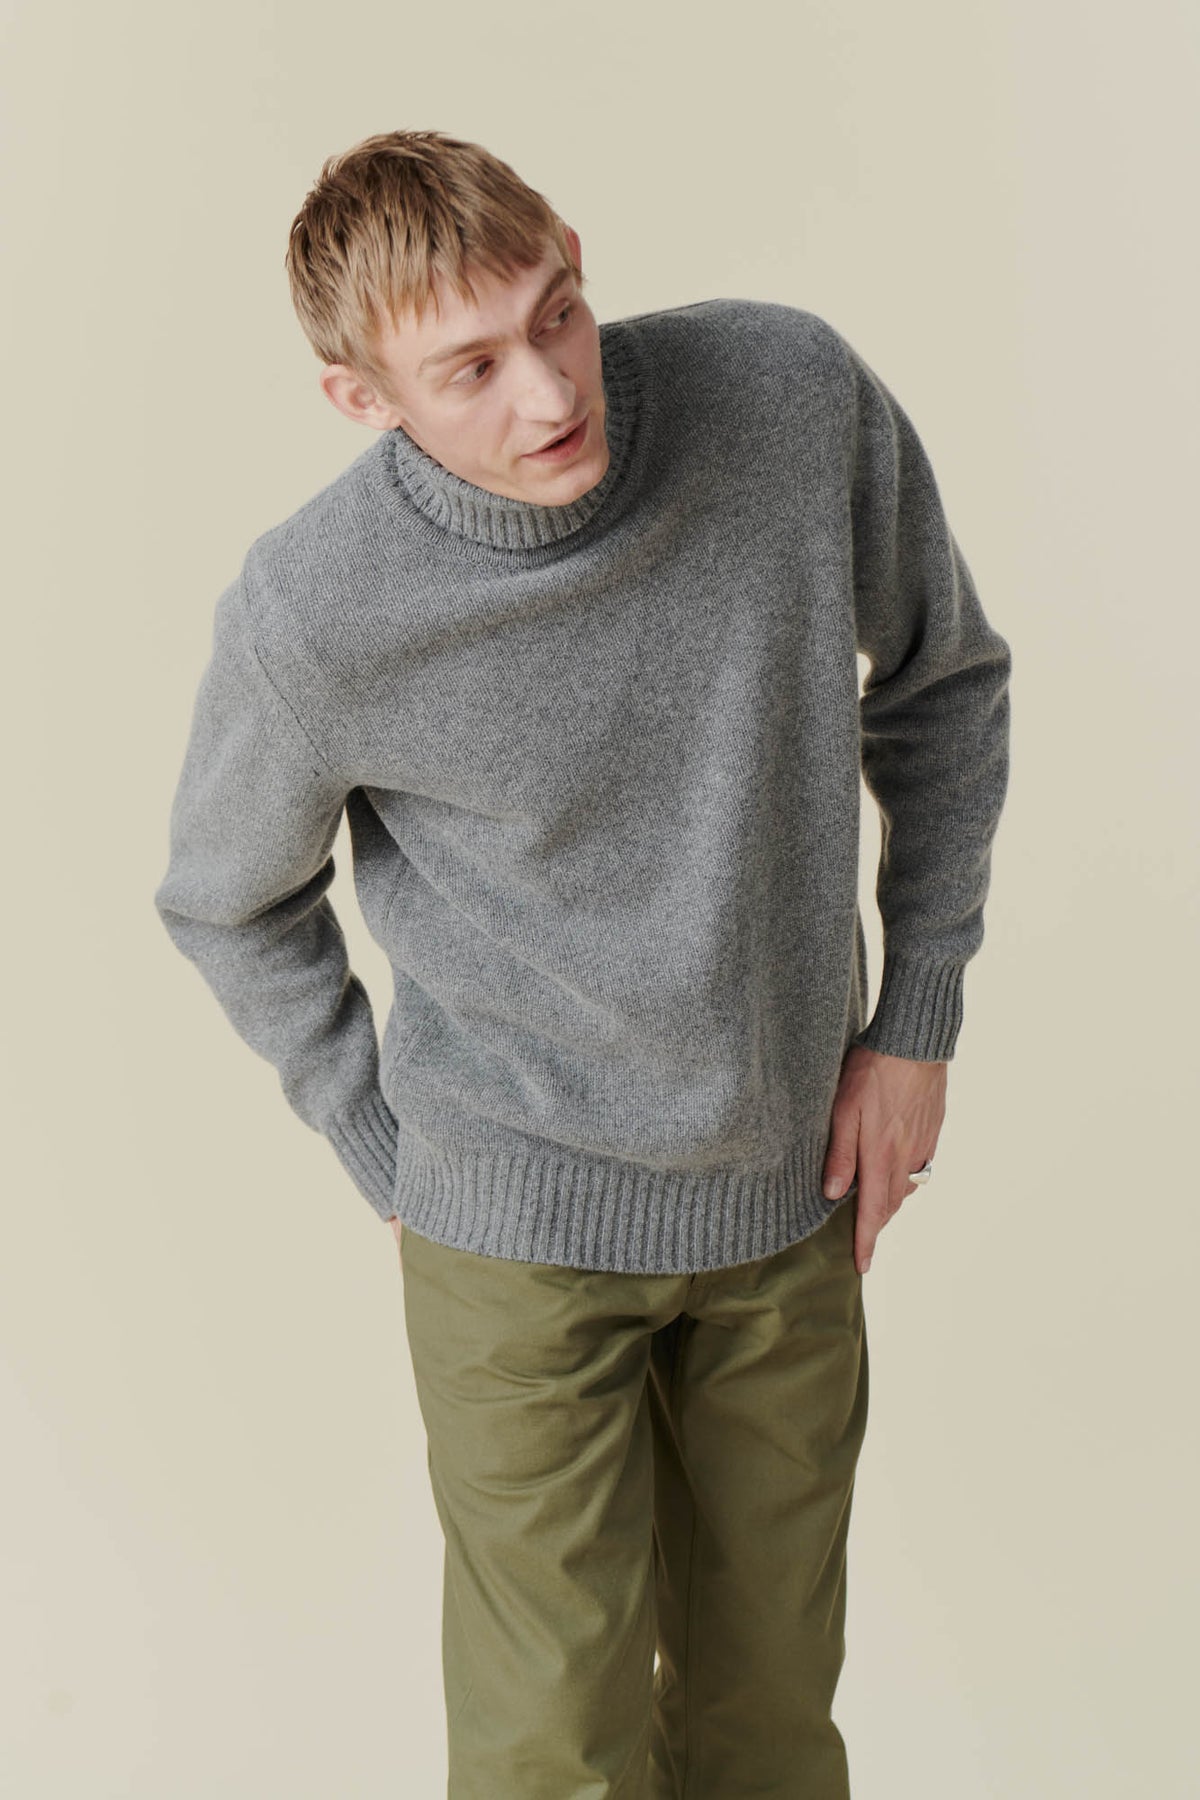 
            White male wearing grey roll neck jumper and olive cameraman pant